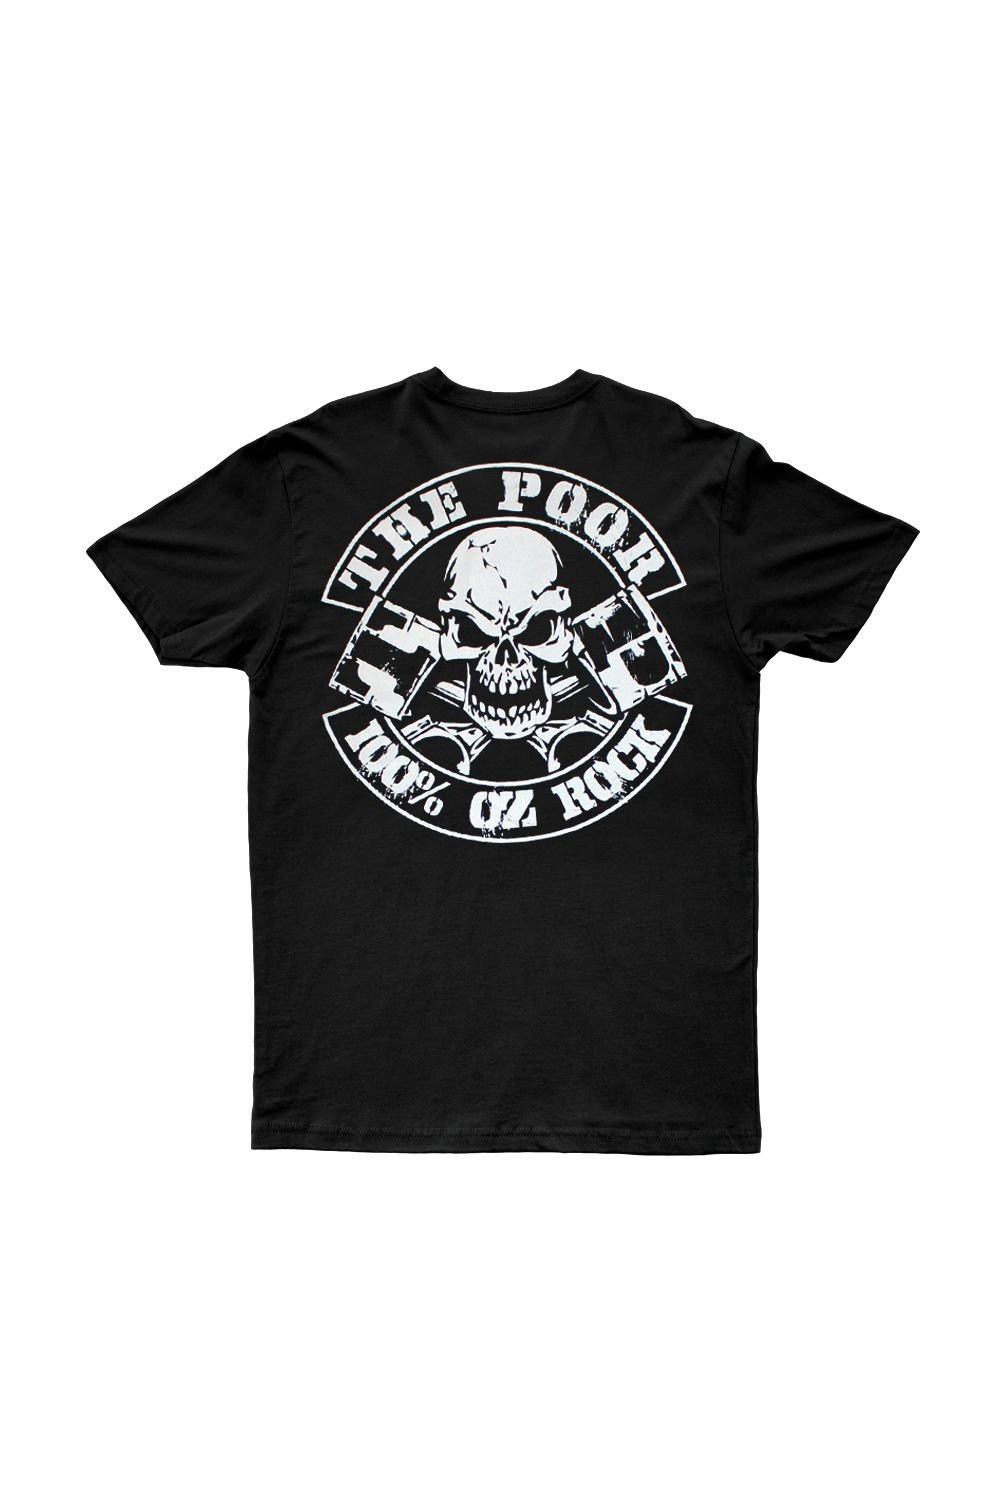 The Poor — The Poor Official Merchandise — Band T-Shirts